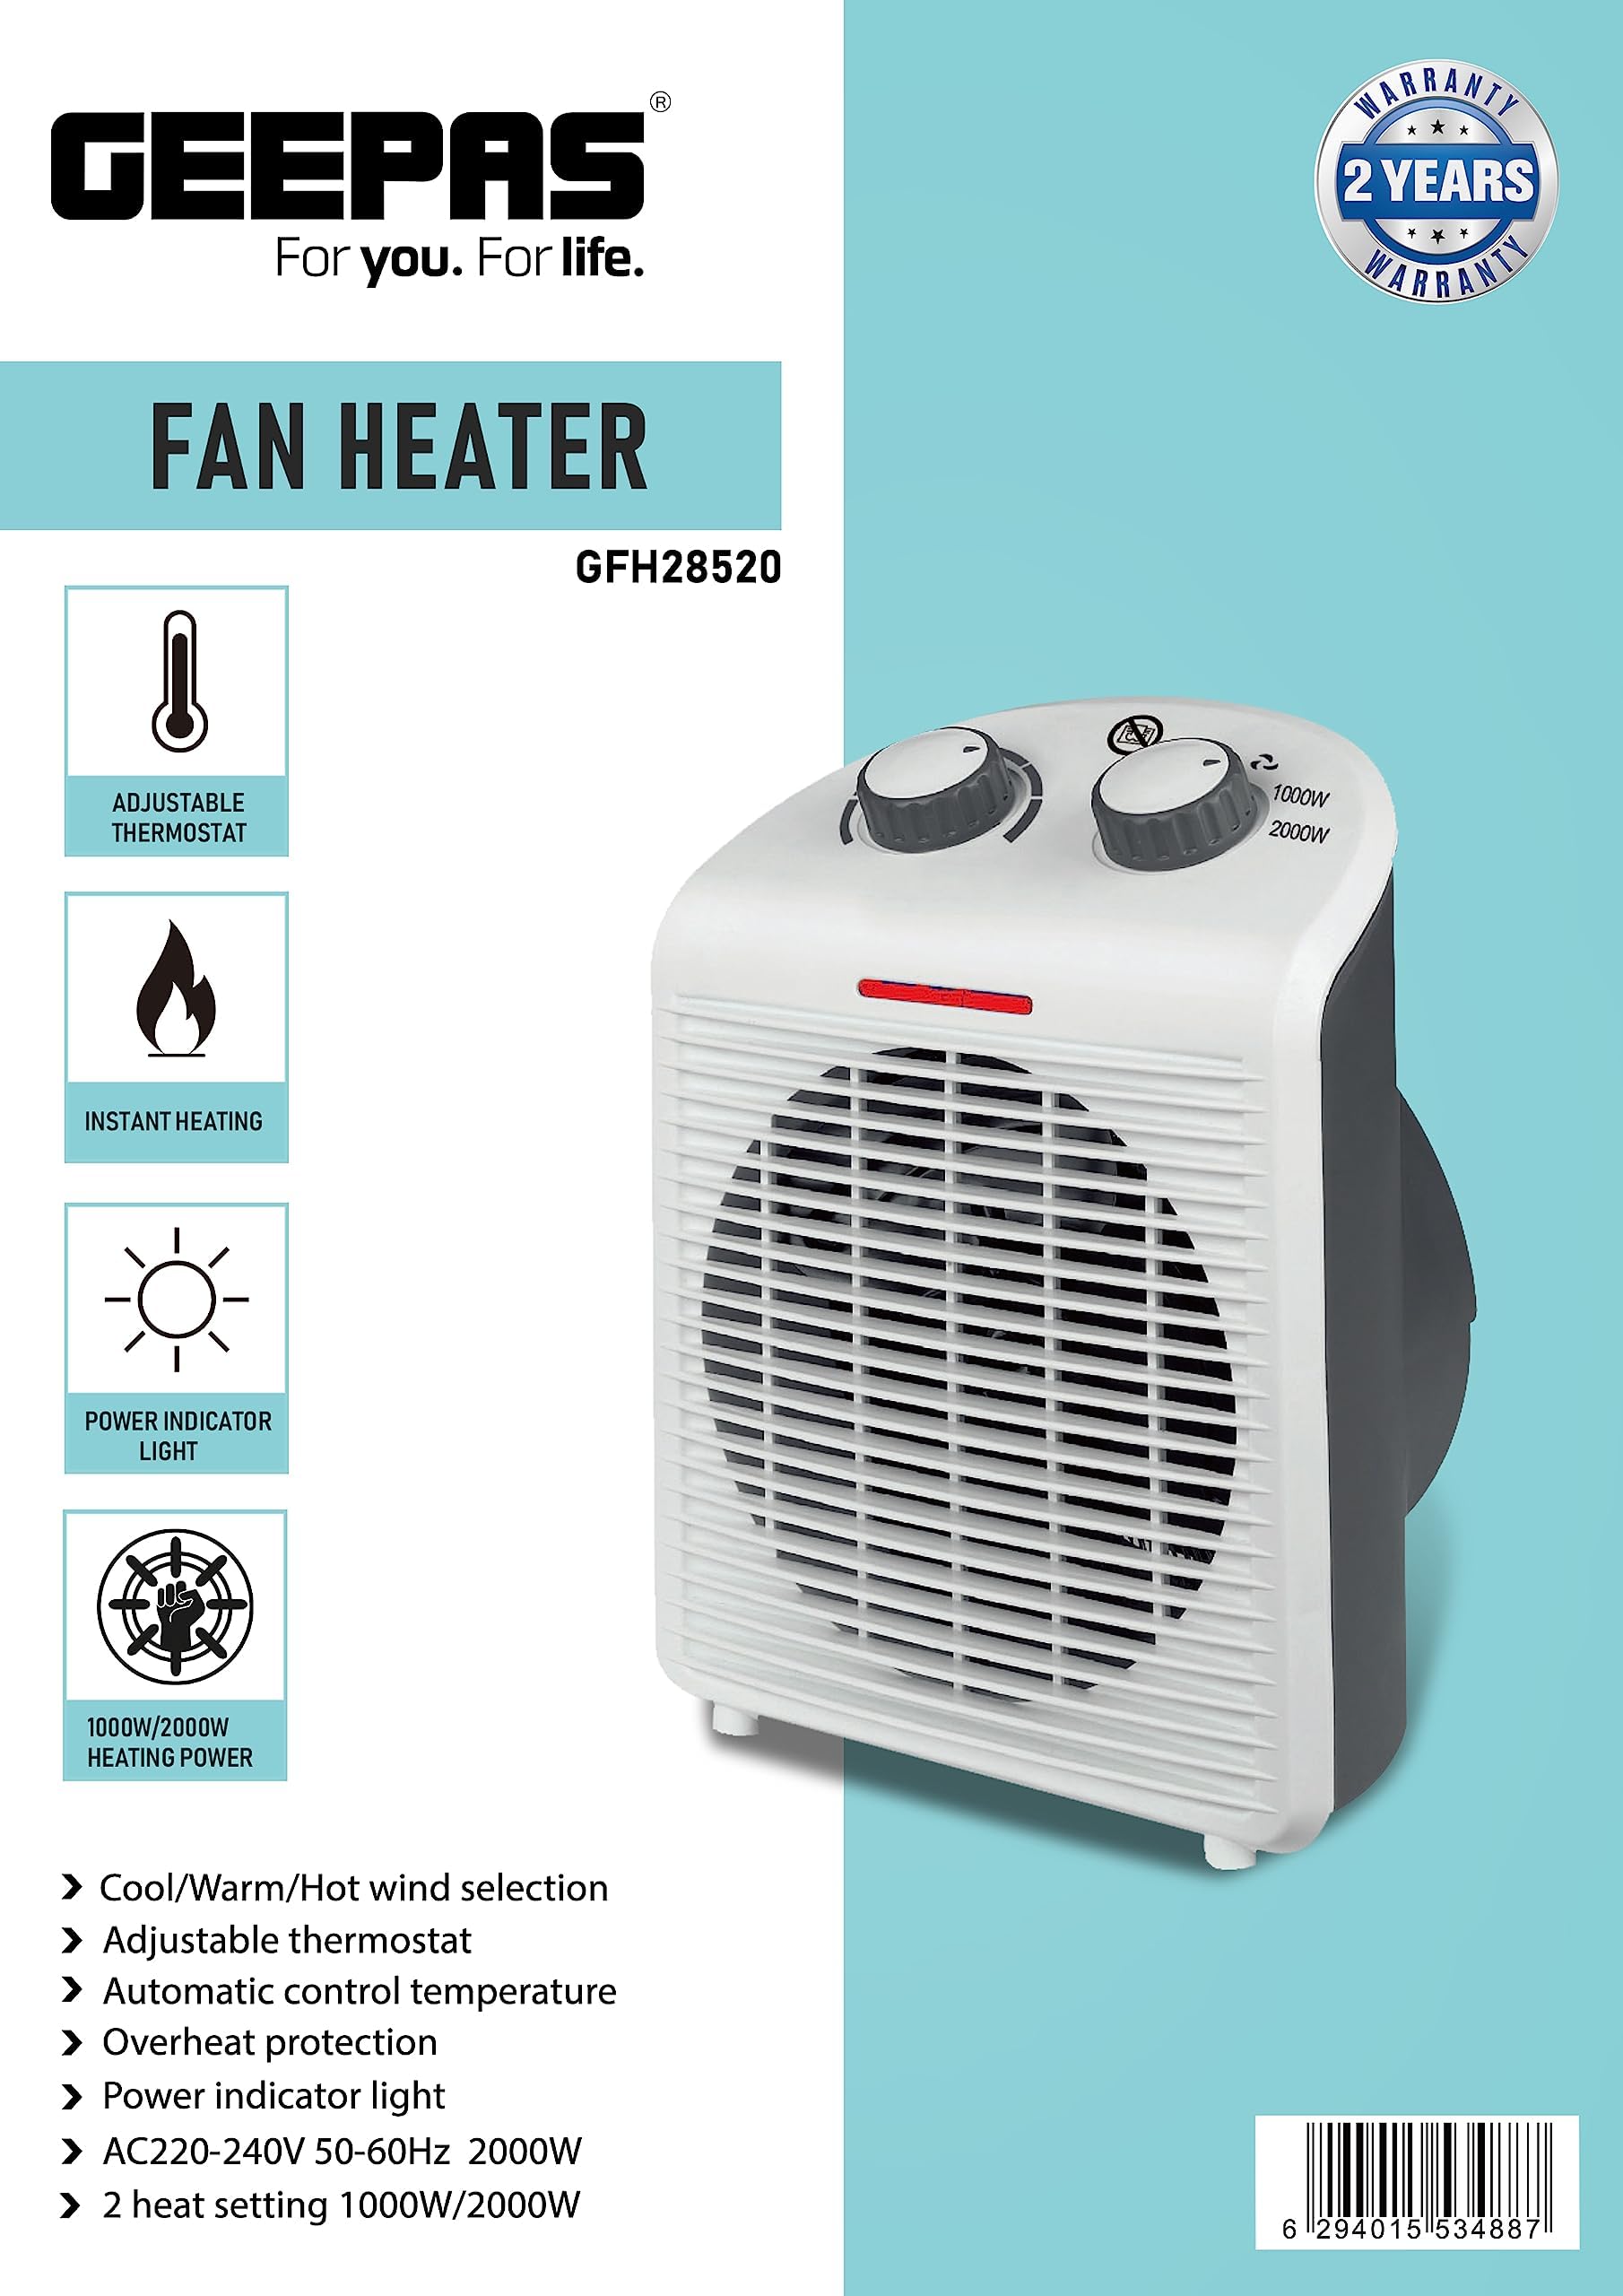 Geepas-Fan Heater with 2 Heat Setting, GFH28520 | Adjustable Thermostat | Cold/Warm/Hot Wind Selection | Overheat Protection | Power Indicator Light